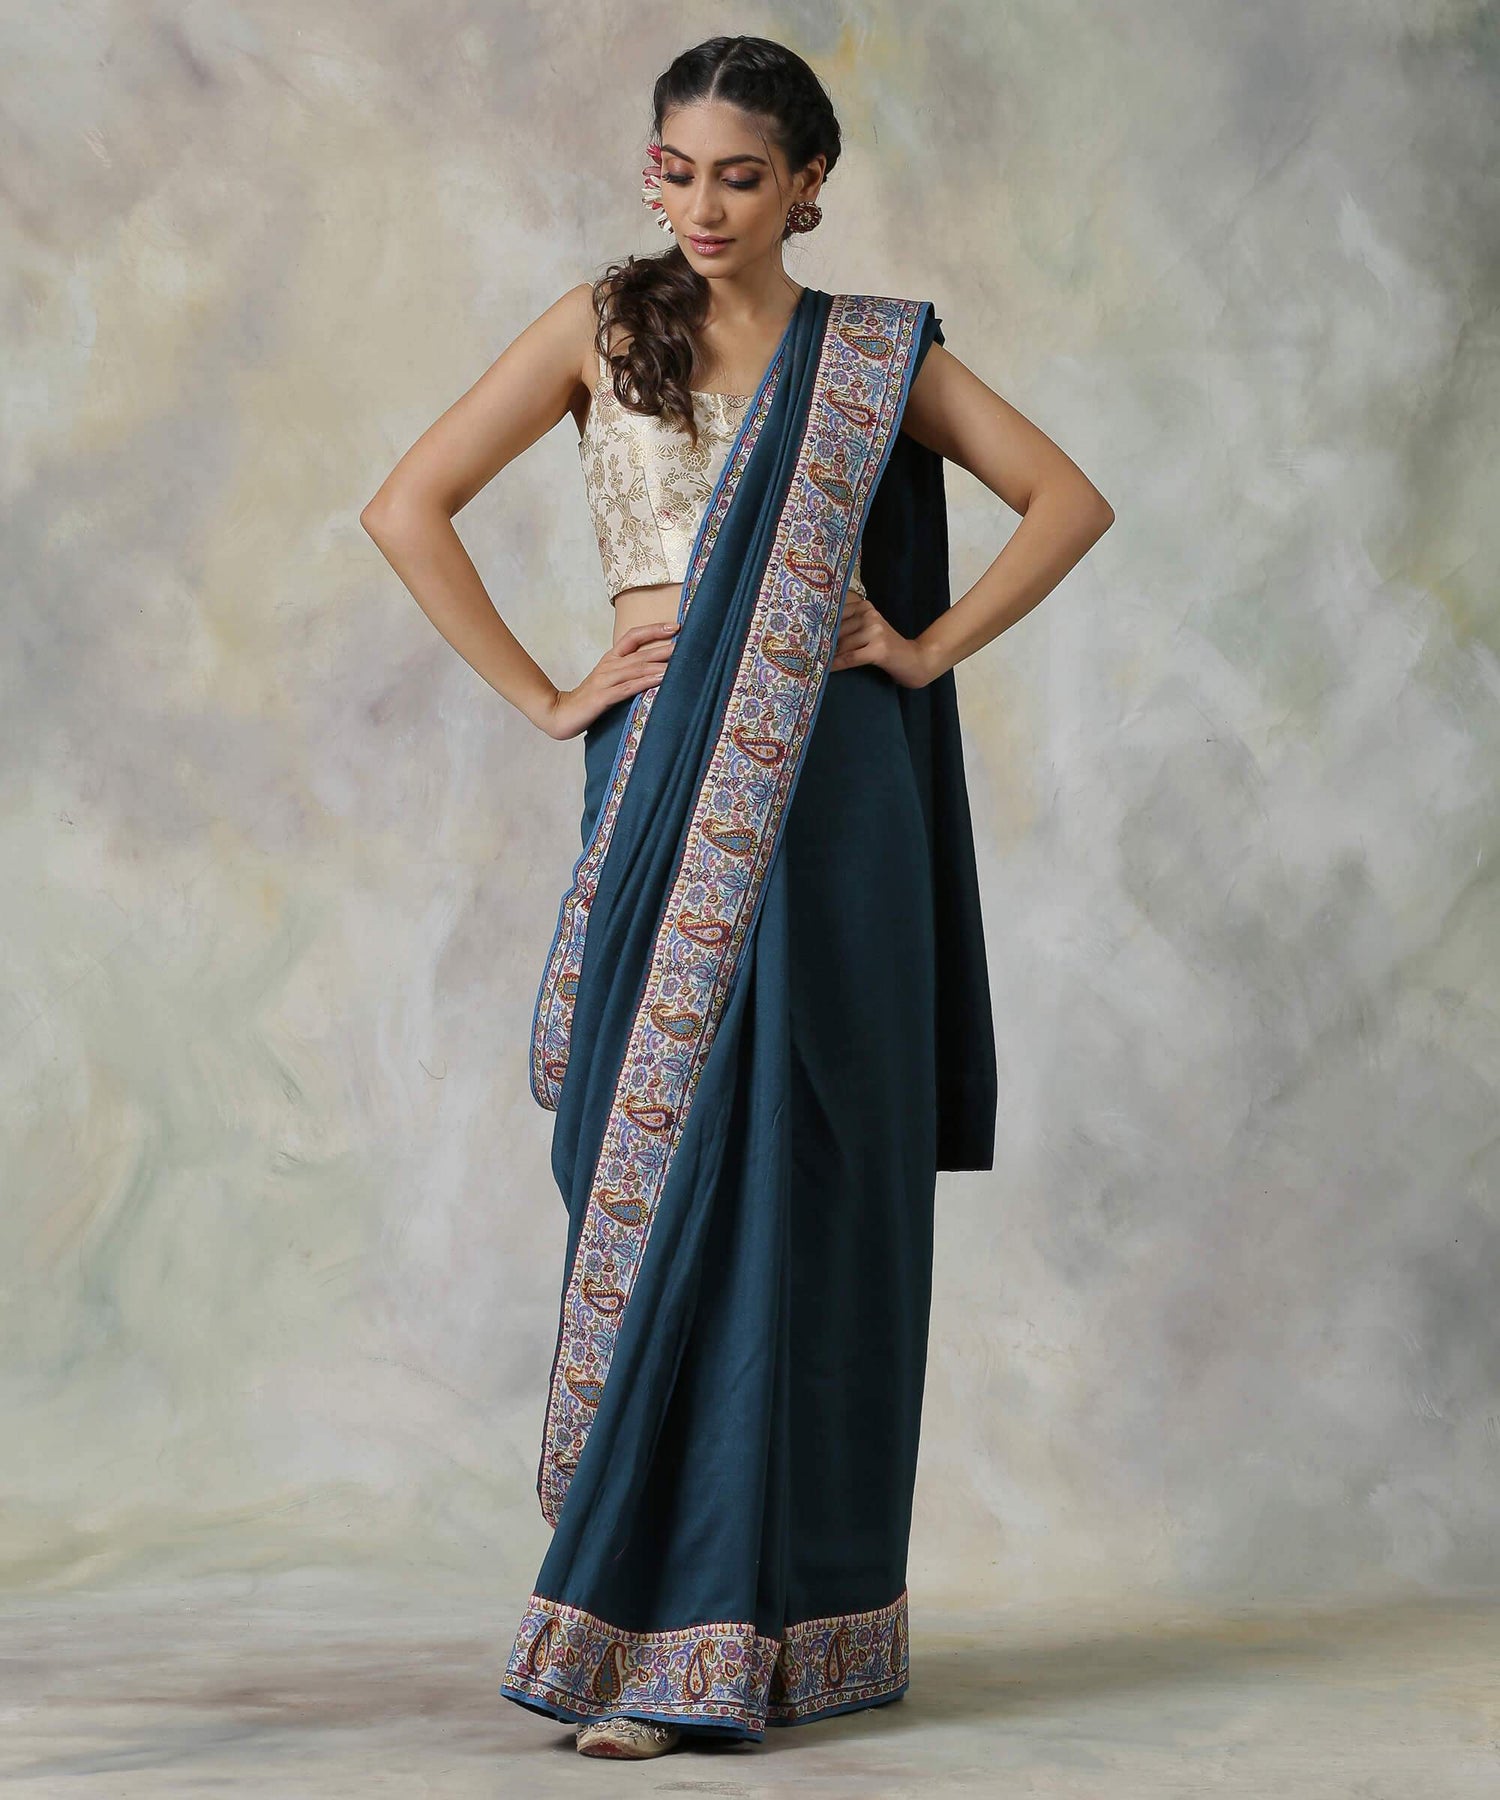 Handwoven_Moonga_Silk_Saree_in_Regal_Blue_with_Hand_Appliqued_Sozni_Needle_Work_Border_WeaverStory_02